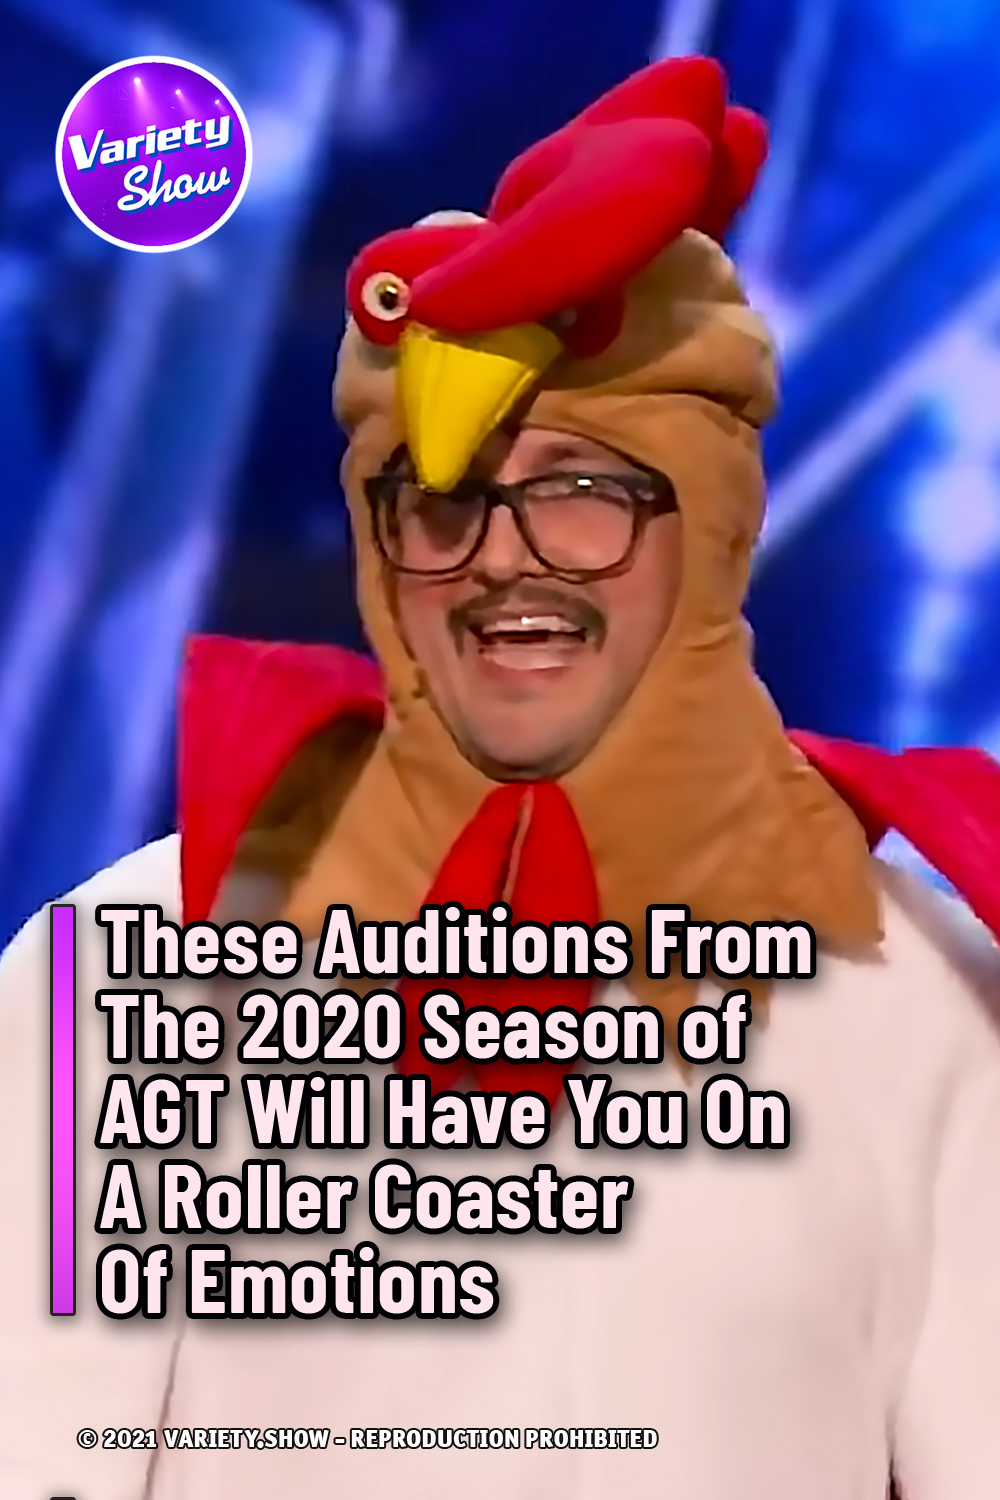 These Auditions From The 2020 Season of AGT Will Have You On A Roller Coaster Of Emotions